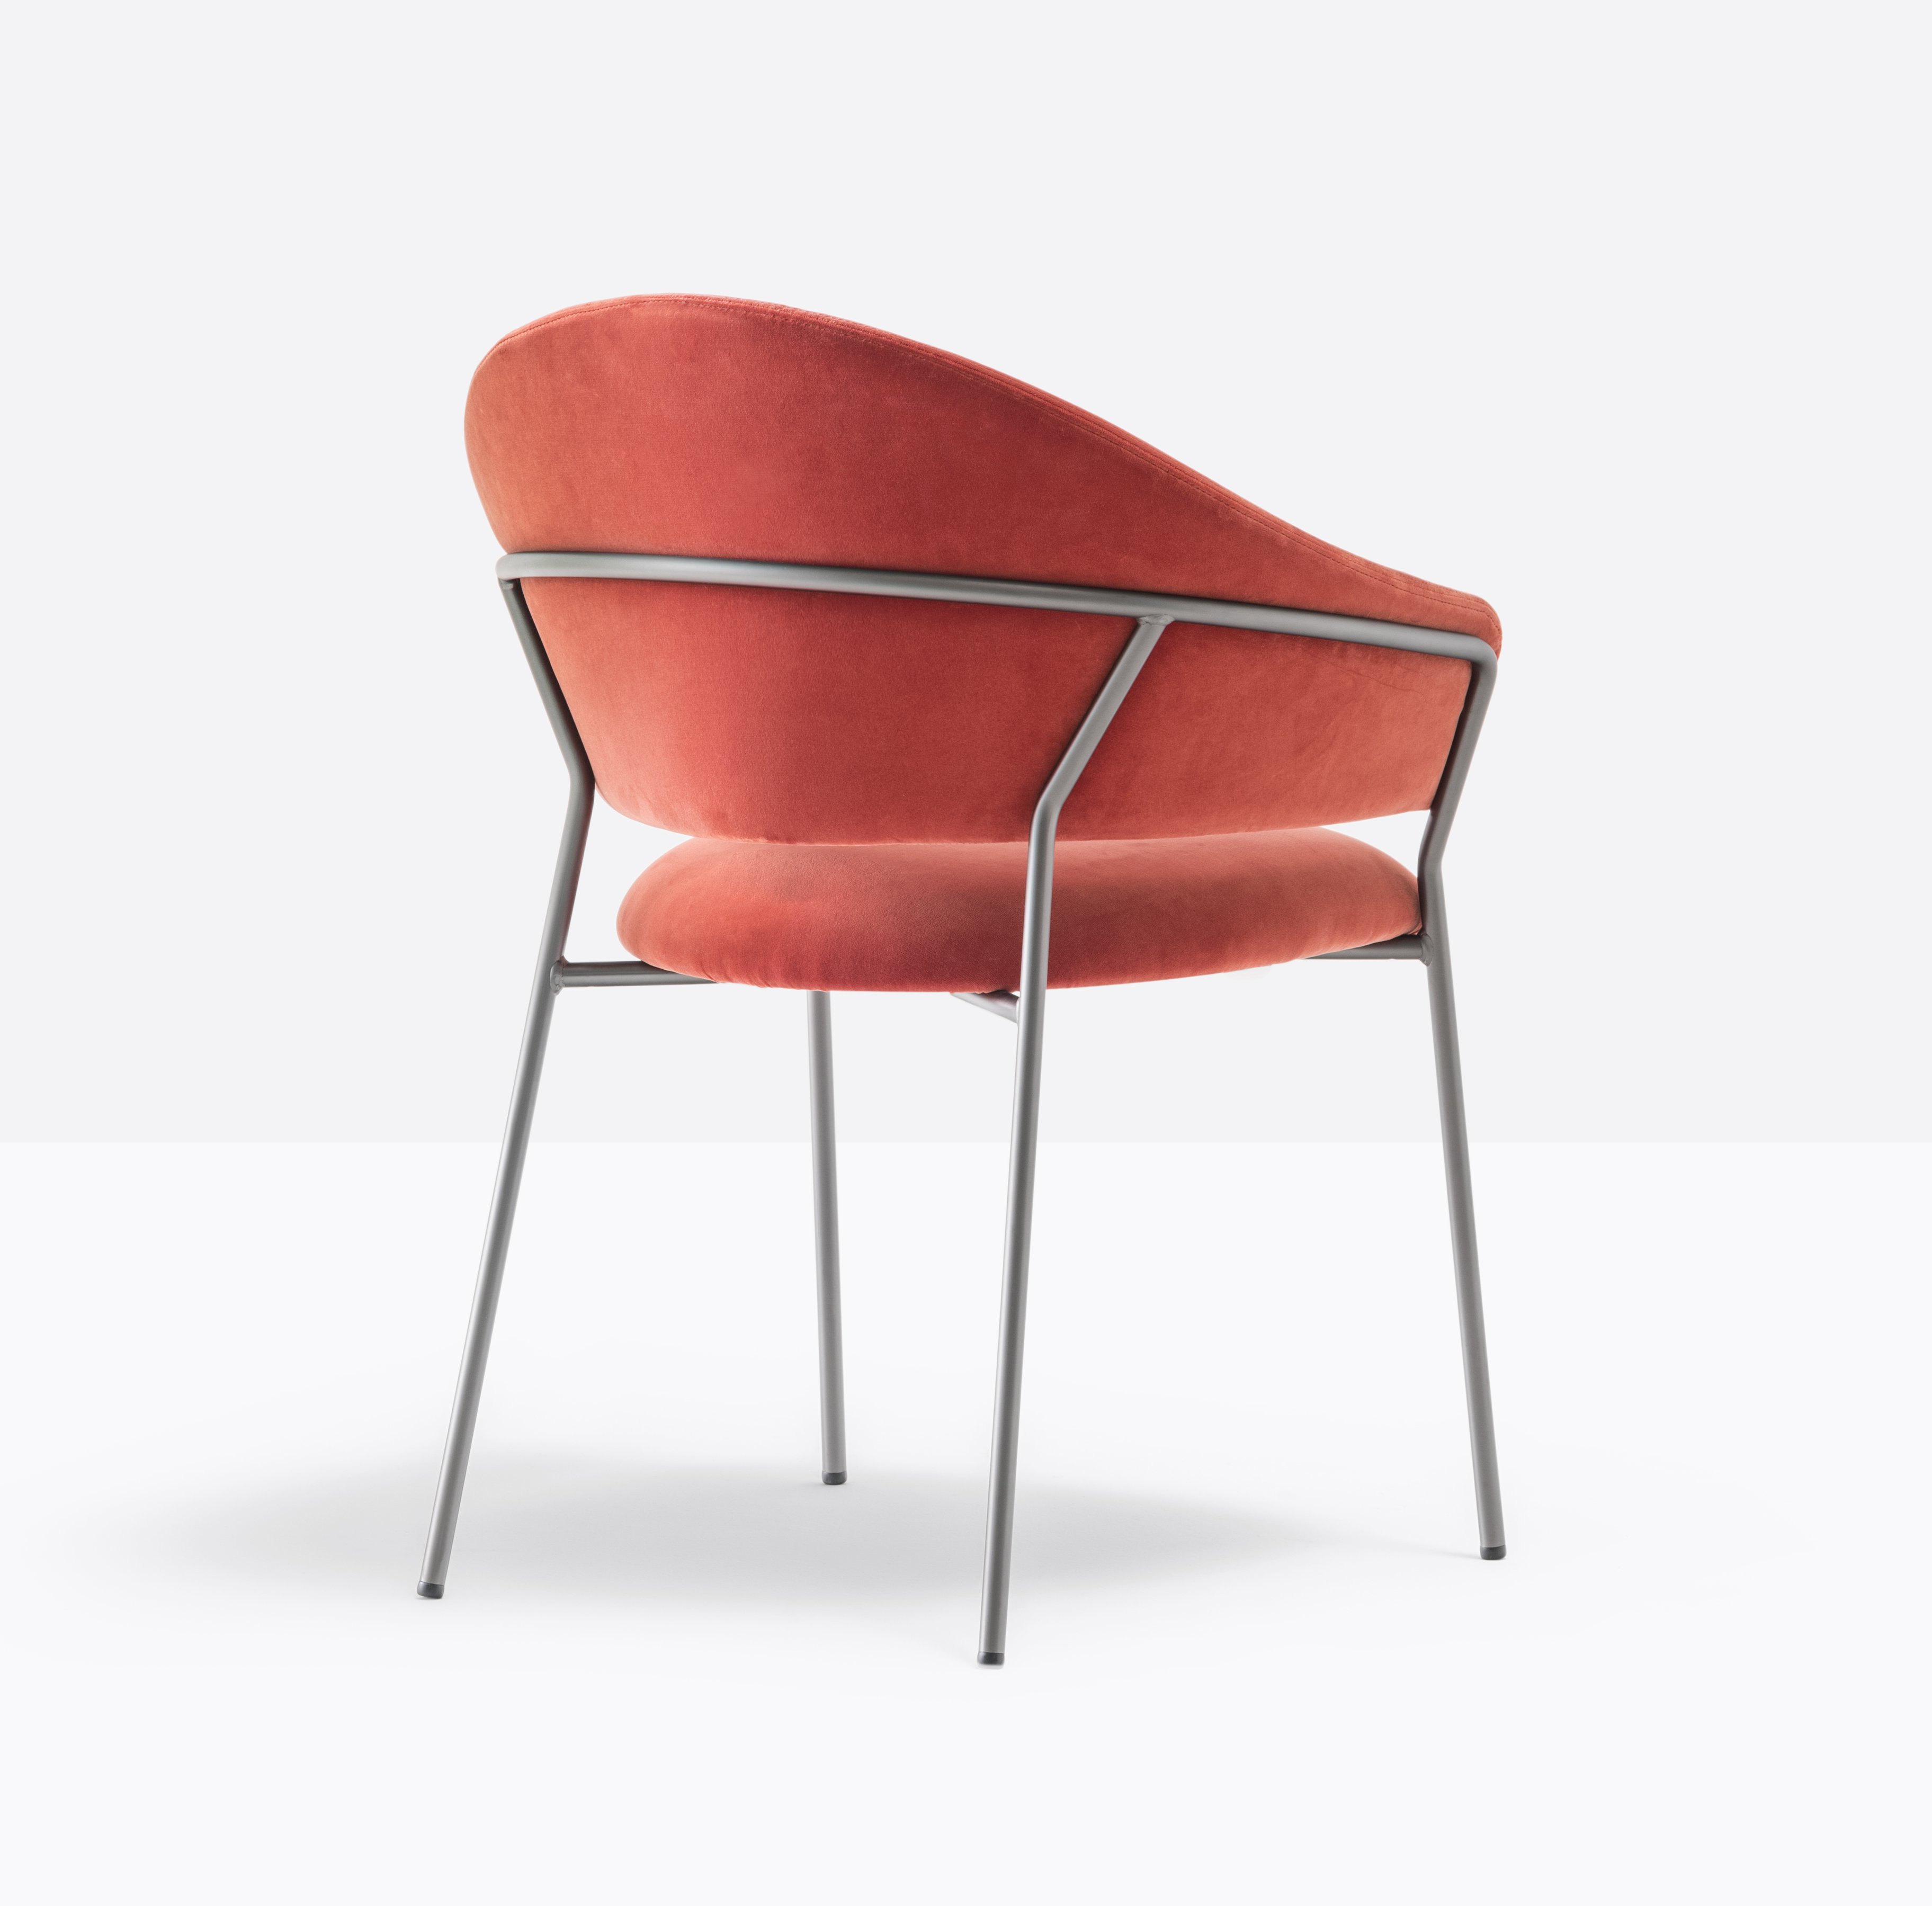 Jazz chair from Pedrali, designed by Pedrali R&D